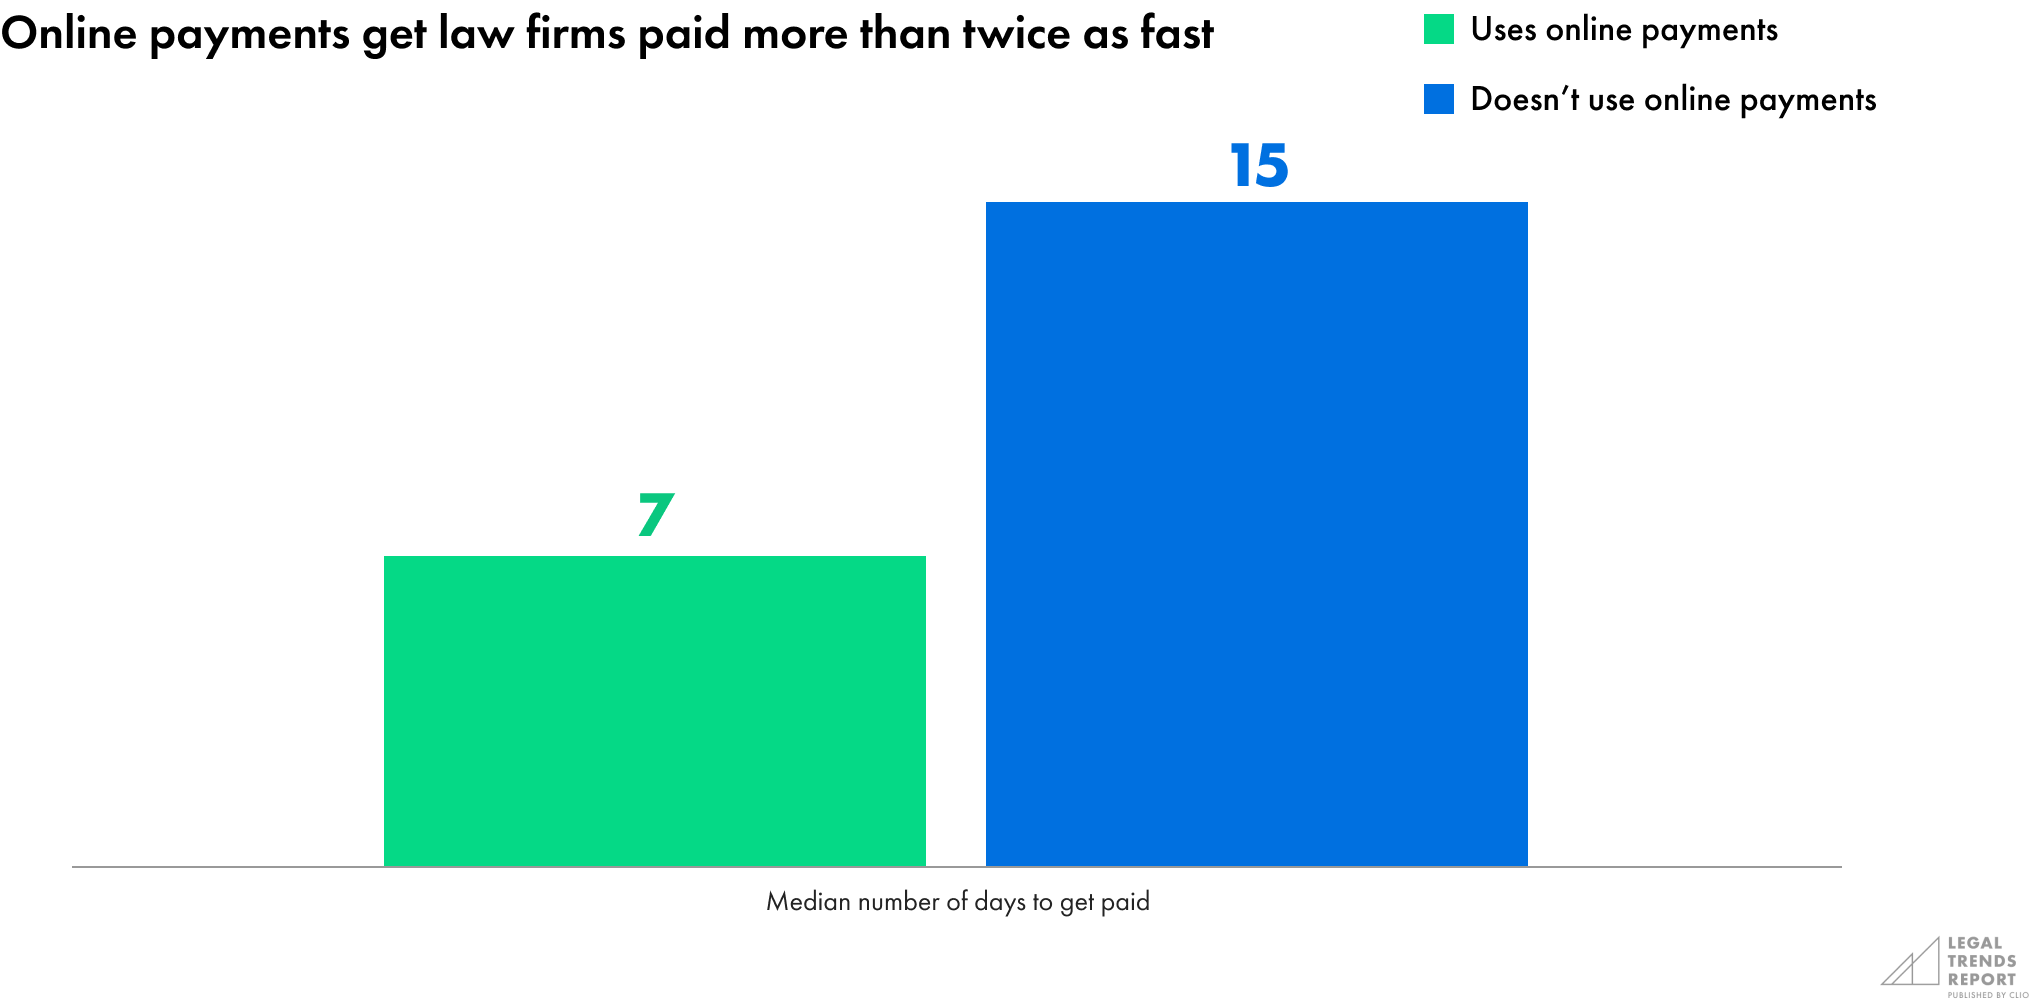 online payments get firms paid more than twice as fast